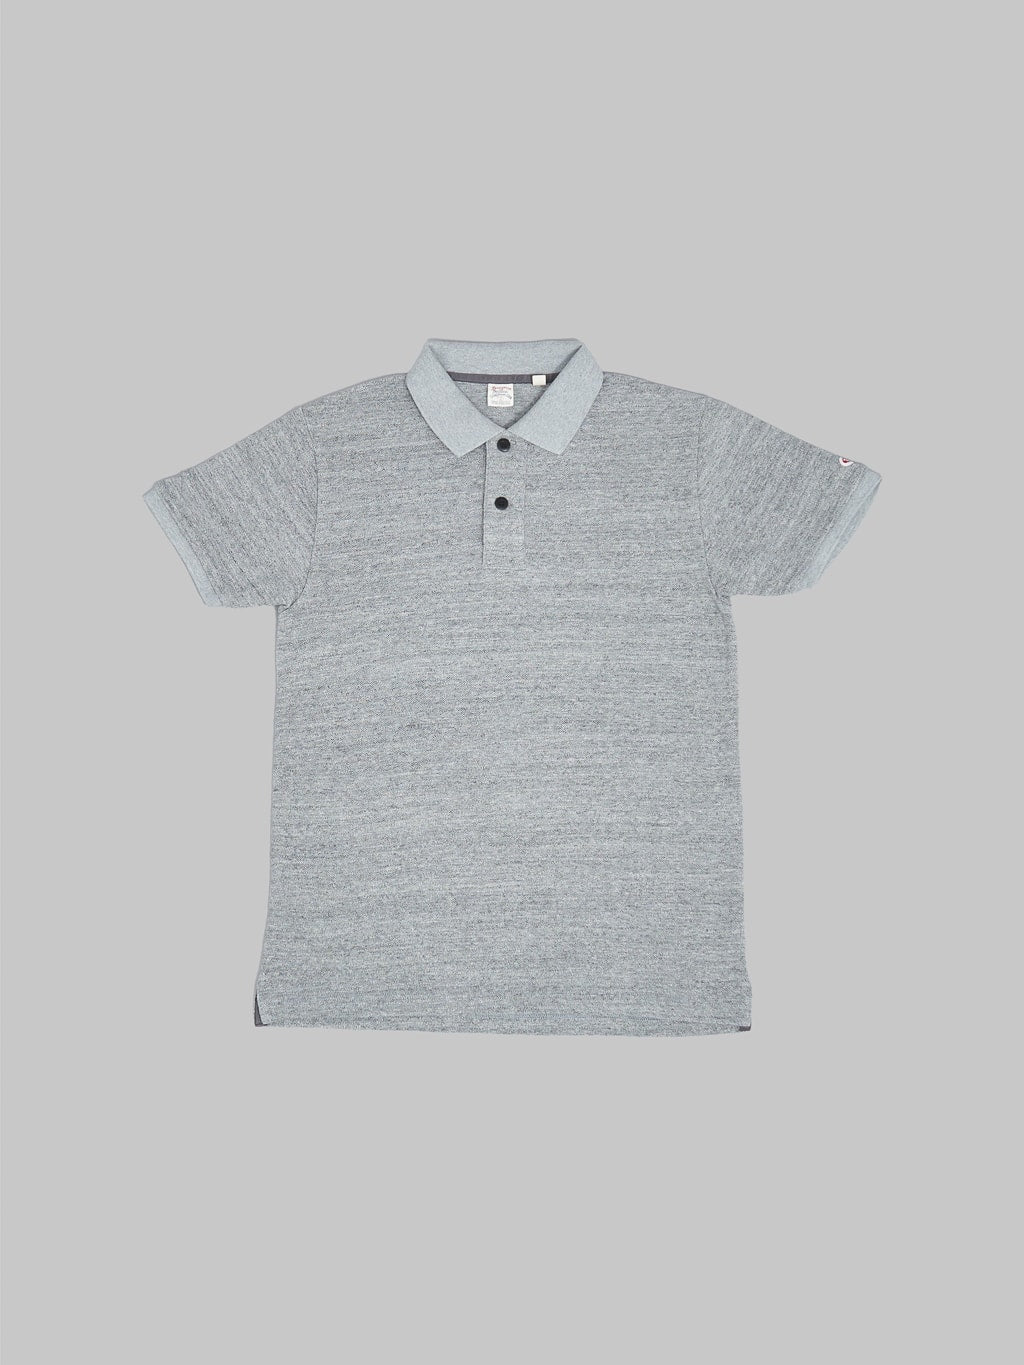 ues polo shirt grey front view